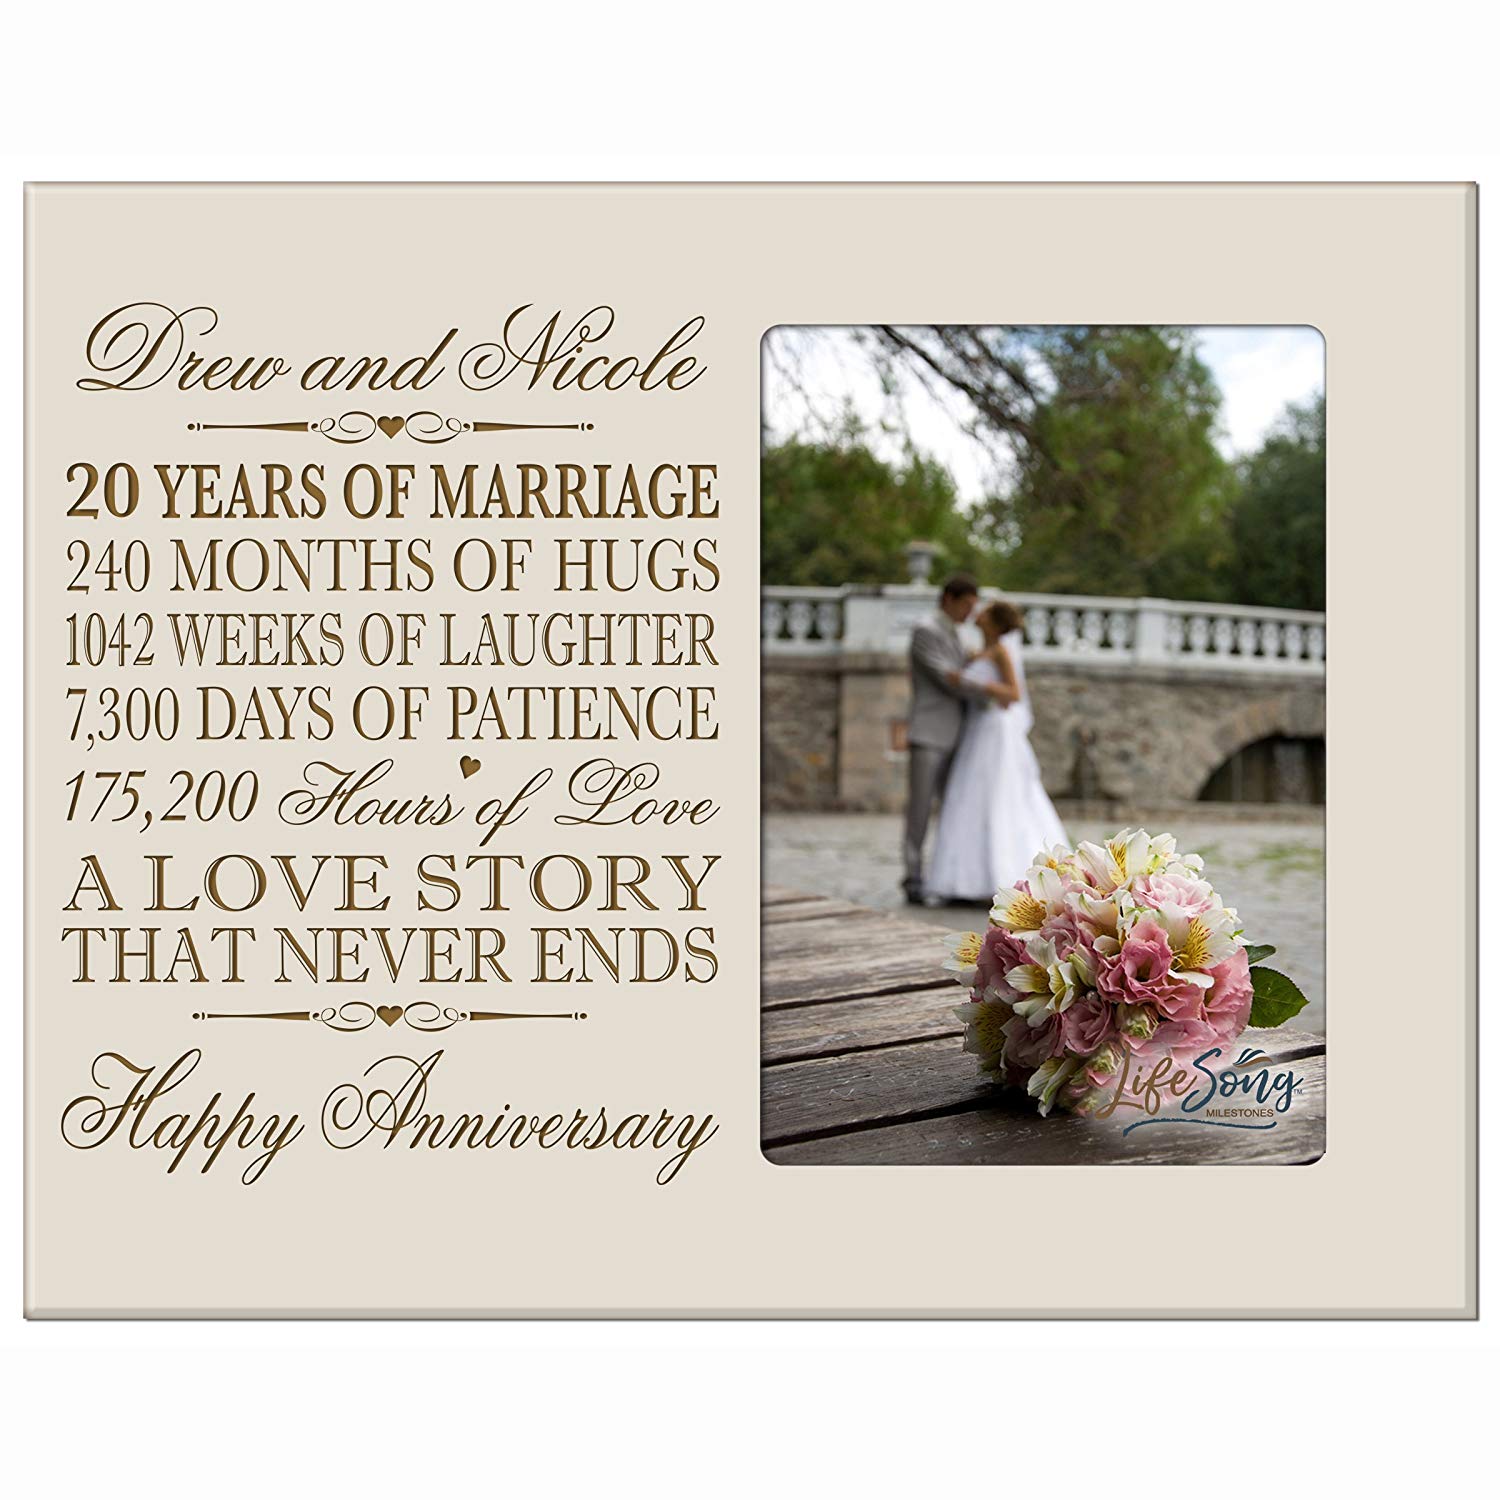 Personalized Couples 20th Wedding Anniversary Picture Frame Decorations - A Love Story - LifeSong Milestones